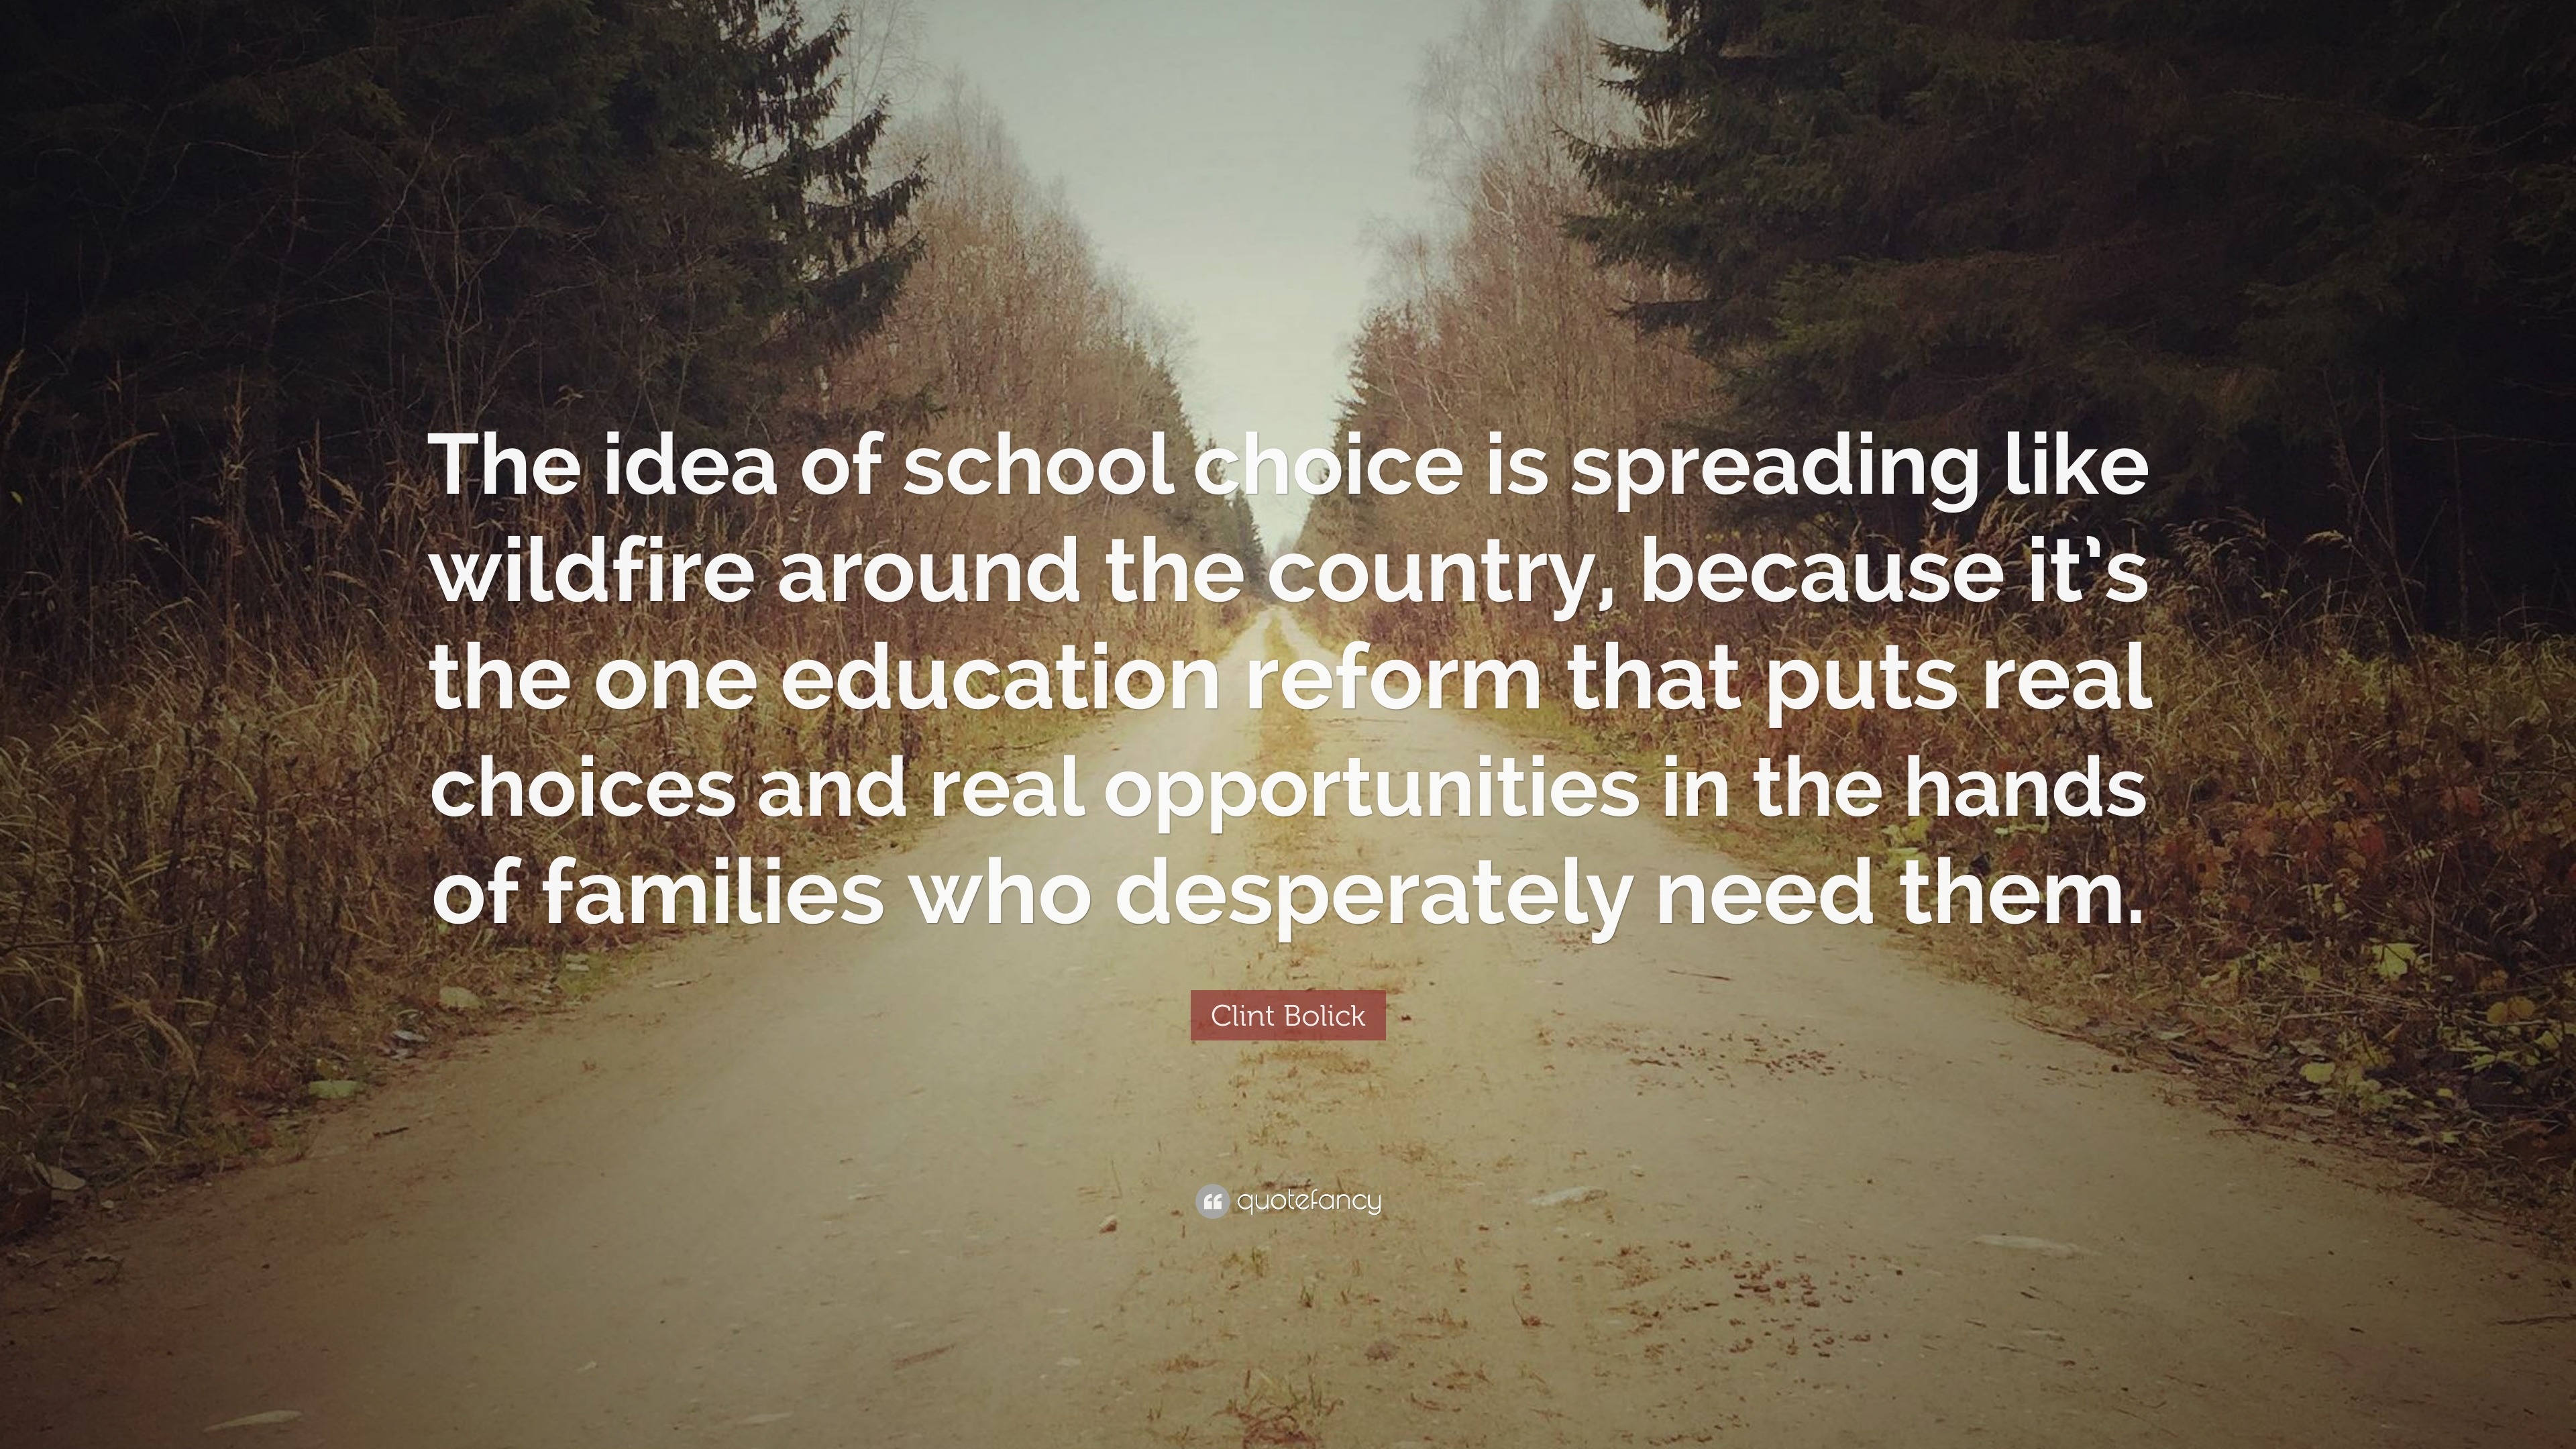 Clint Bolick Quote: “The idea of school choice is spreading like ...